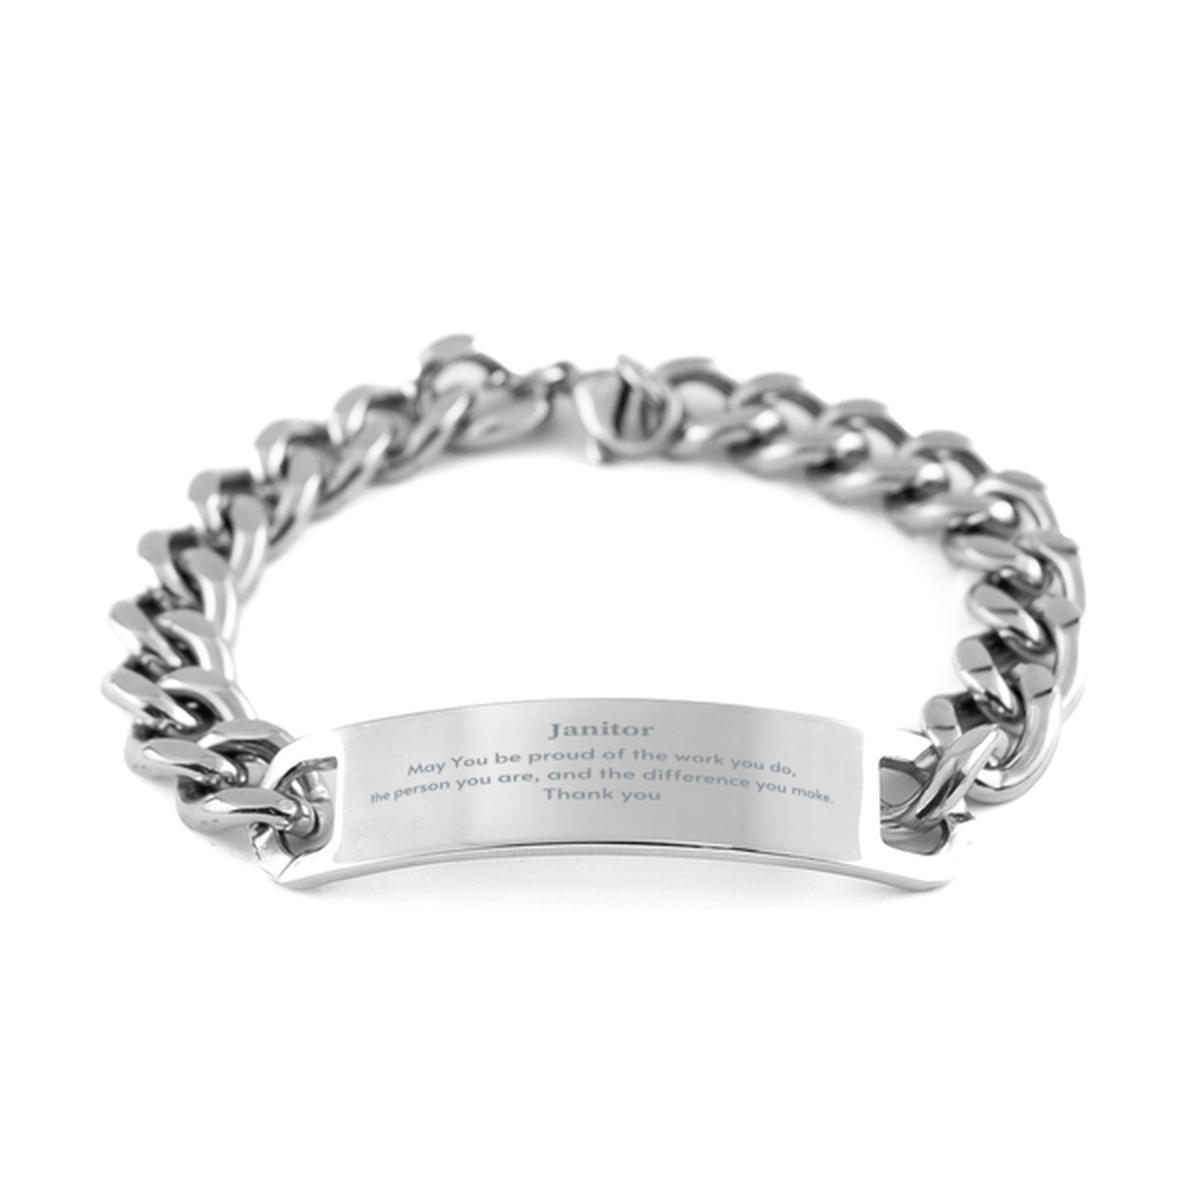 Heartwarming Cuban Chain Stainless Steel Bracelet Retirement Coworkers Gifts for Janitor, Janitor May You be proud of the work you do, the person you are Gifts for Boss Men Women Friends